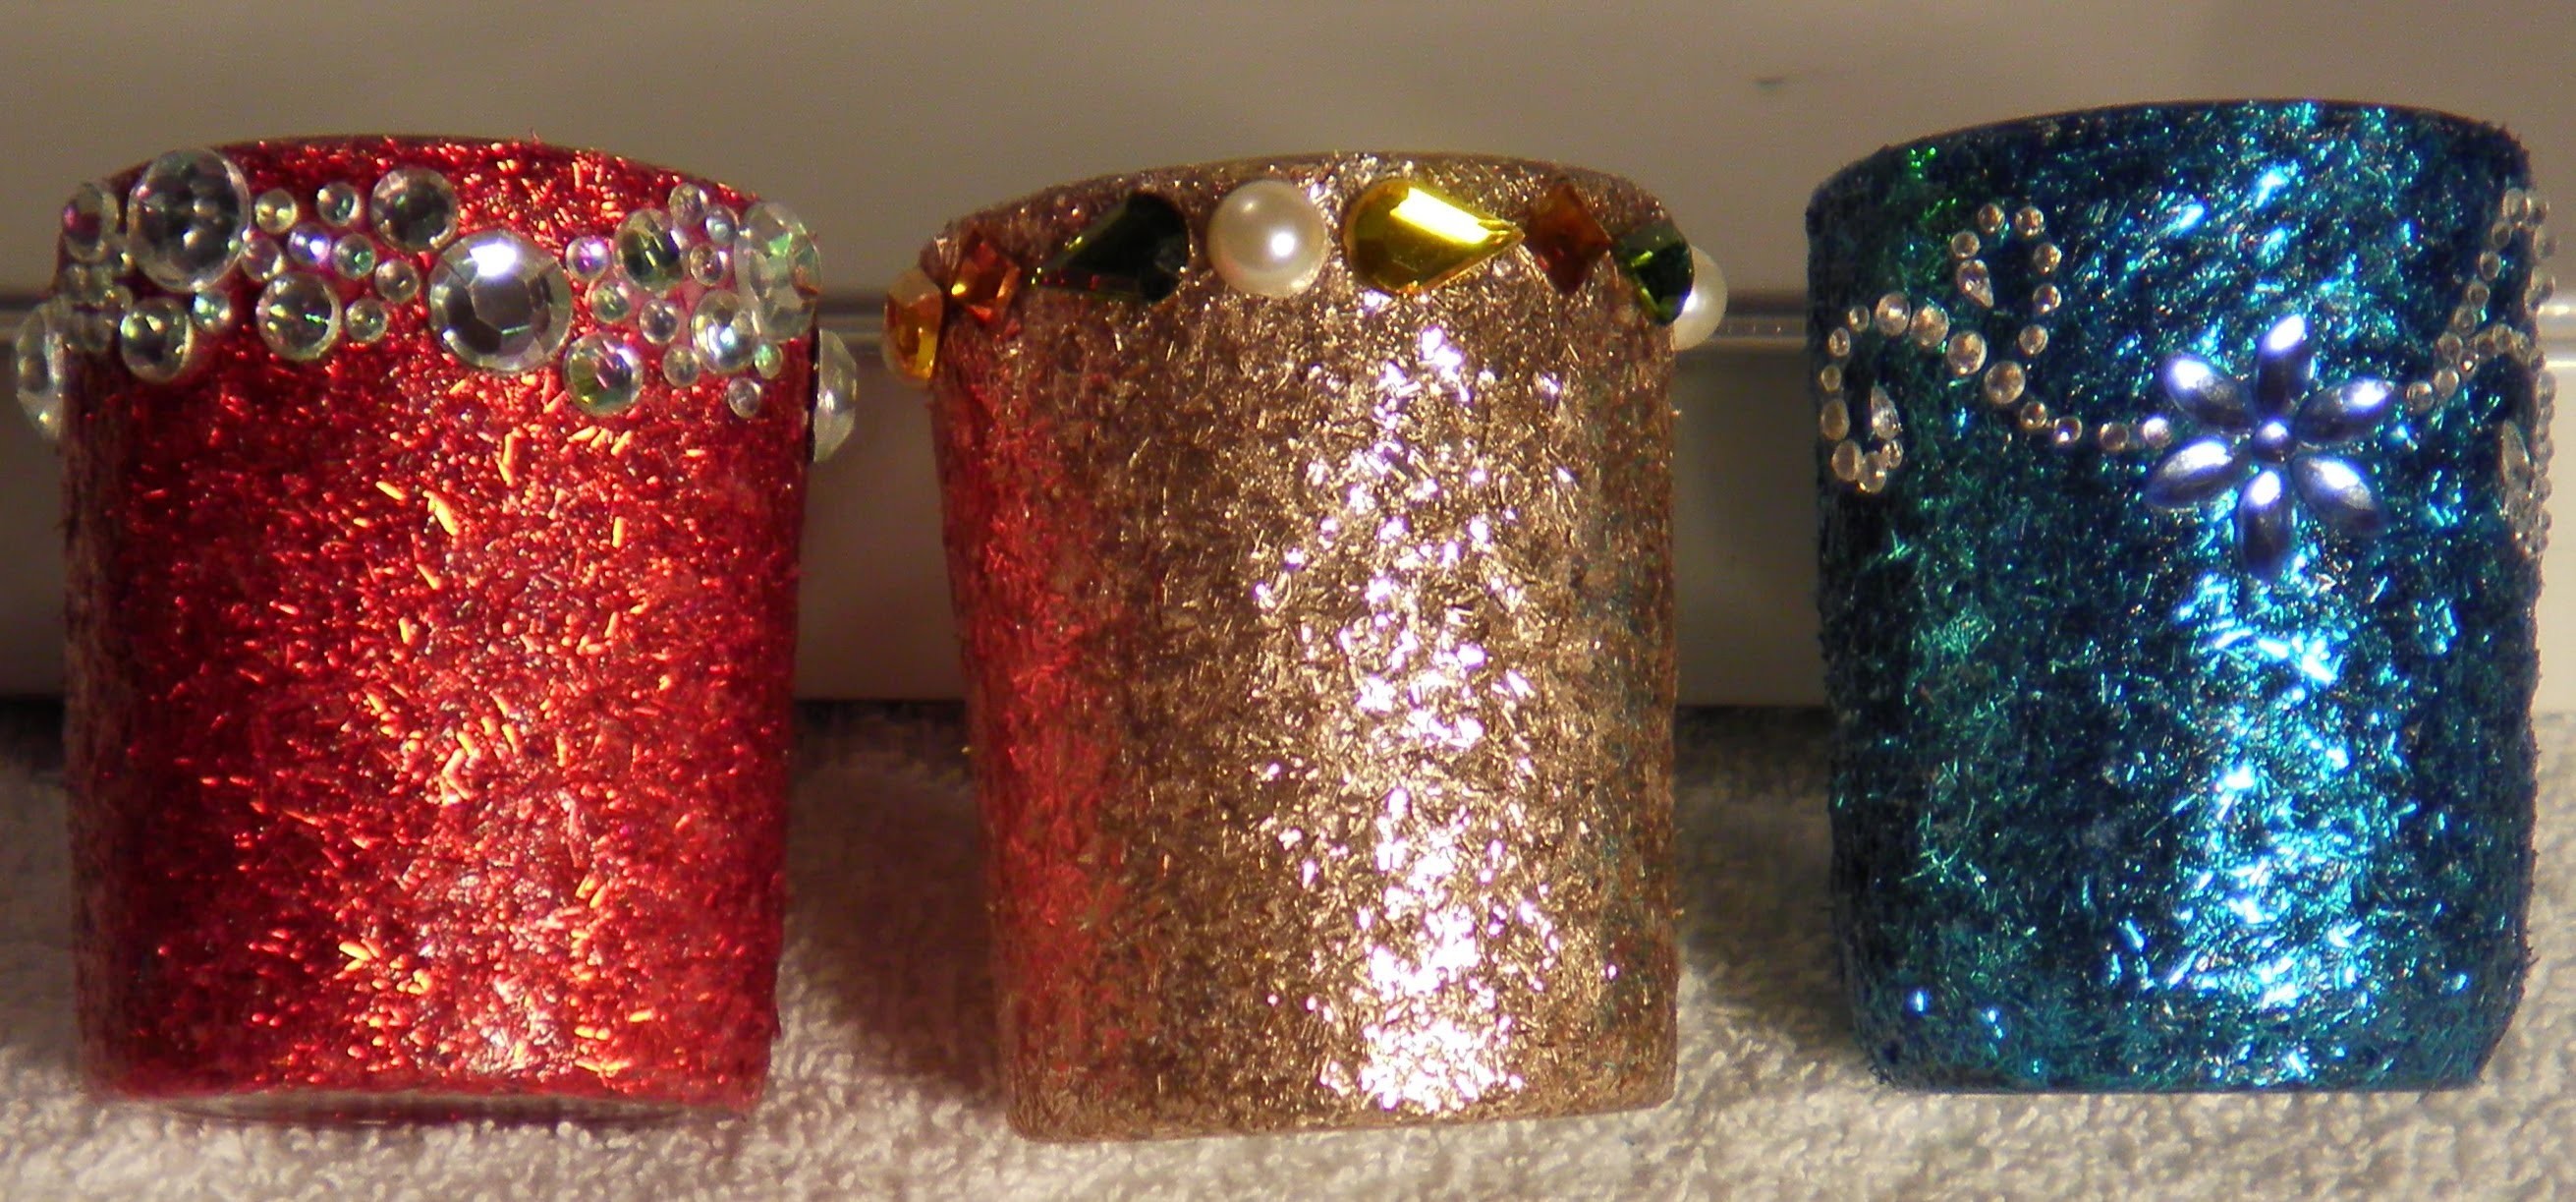 Make Beautiful Holders For Christmas Gifts! Lipsticks, Rings, Flowers, Candles & More!